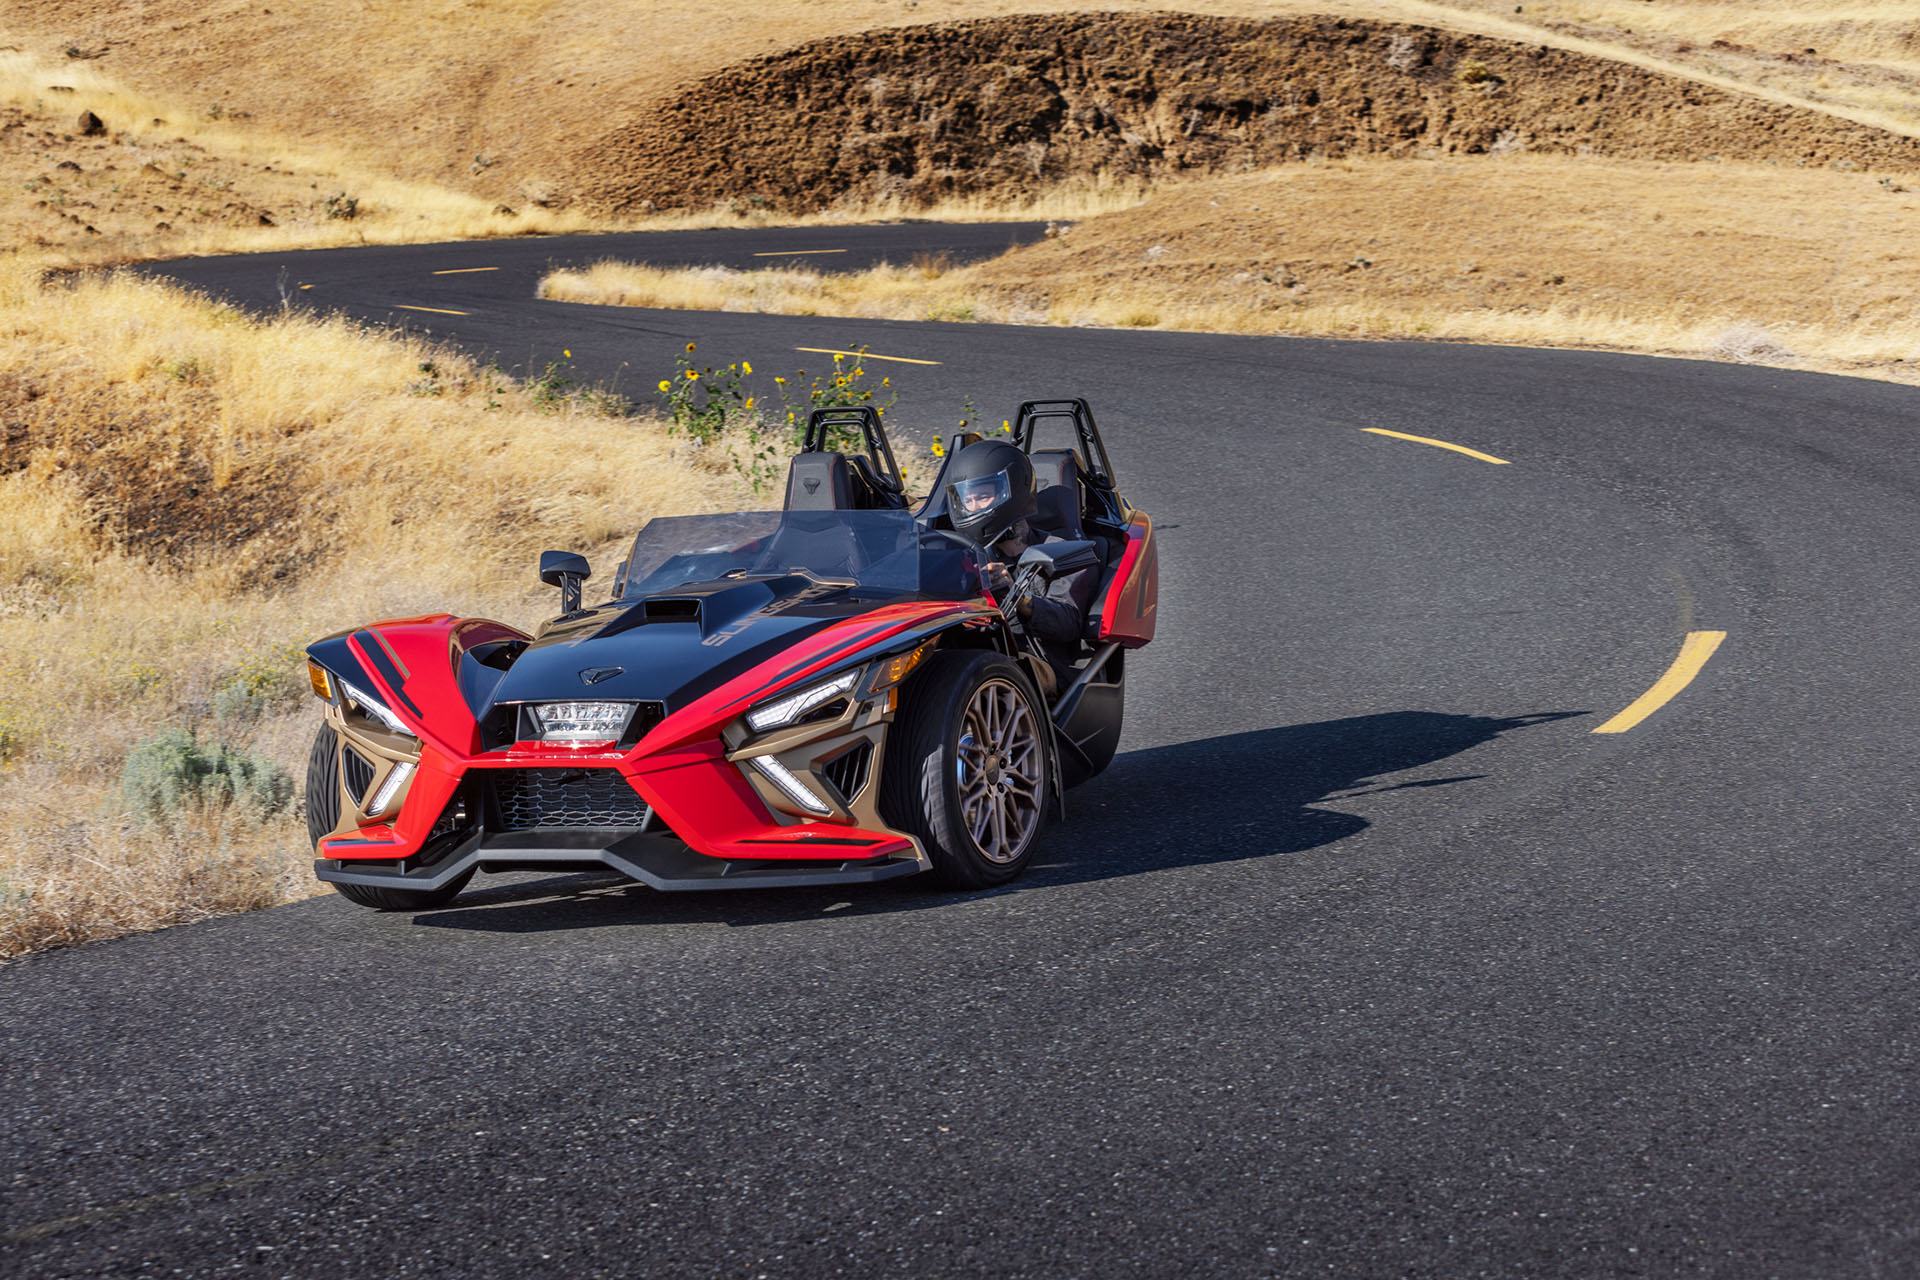 2022 Slingshot Signature Limited Edition in Dimondale, Michigan - Photo 5